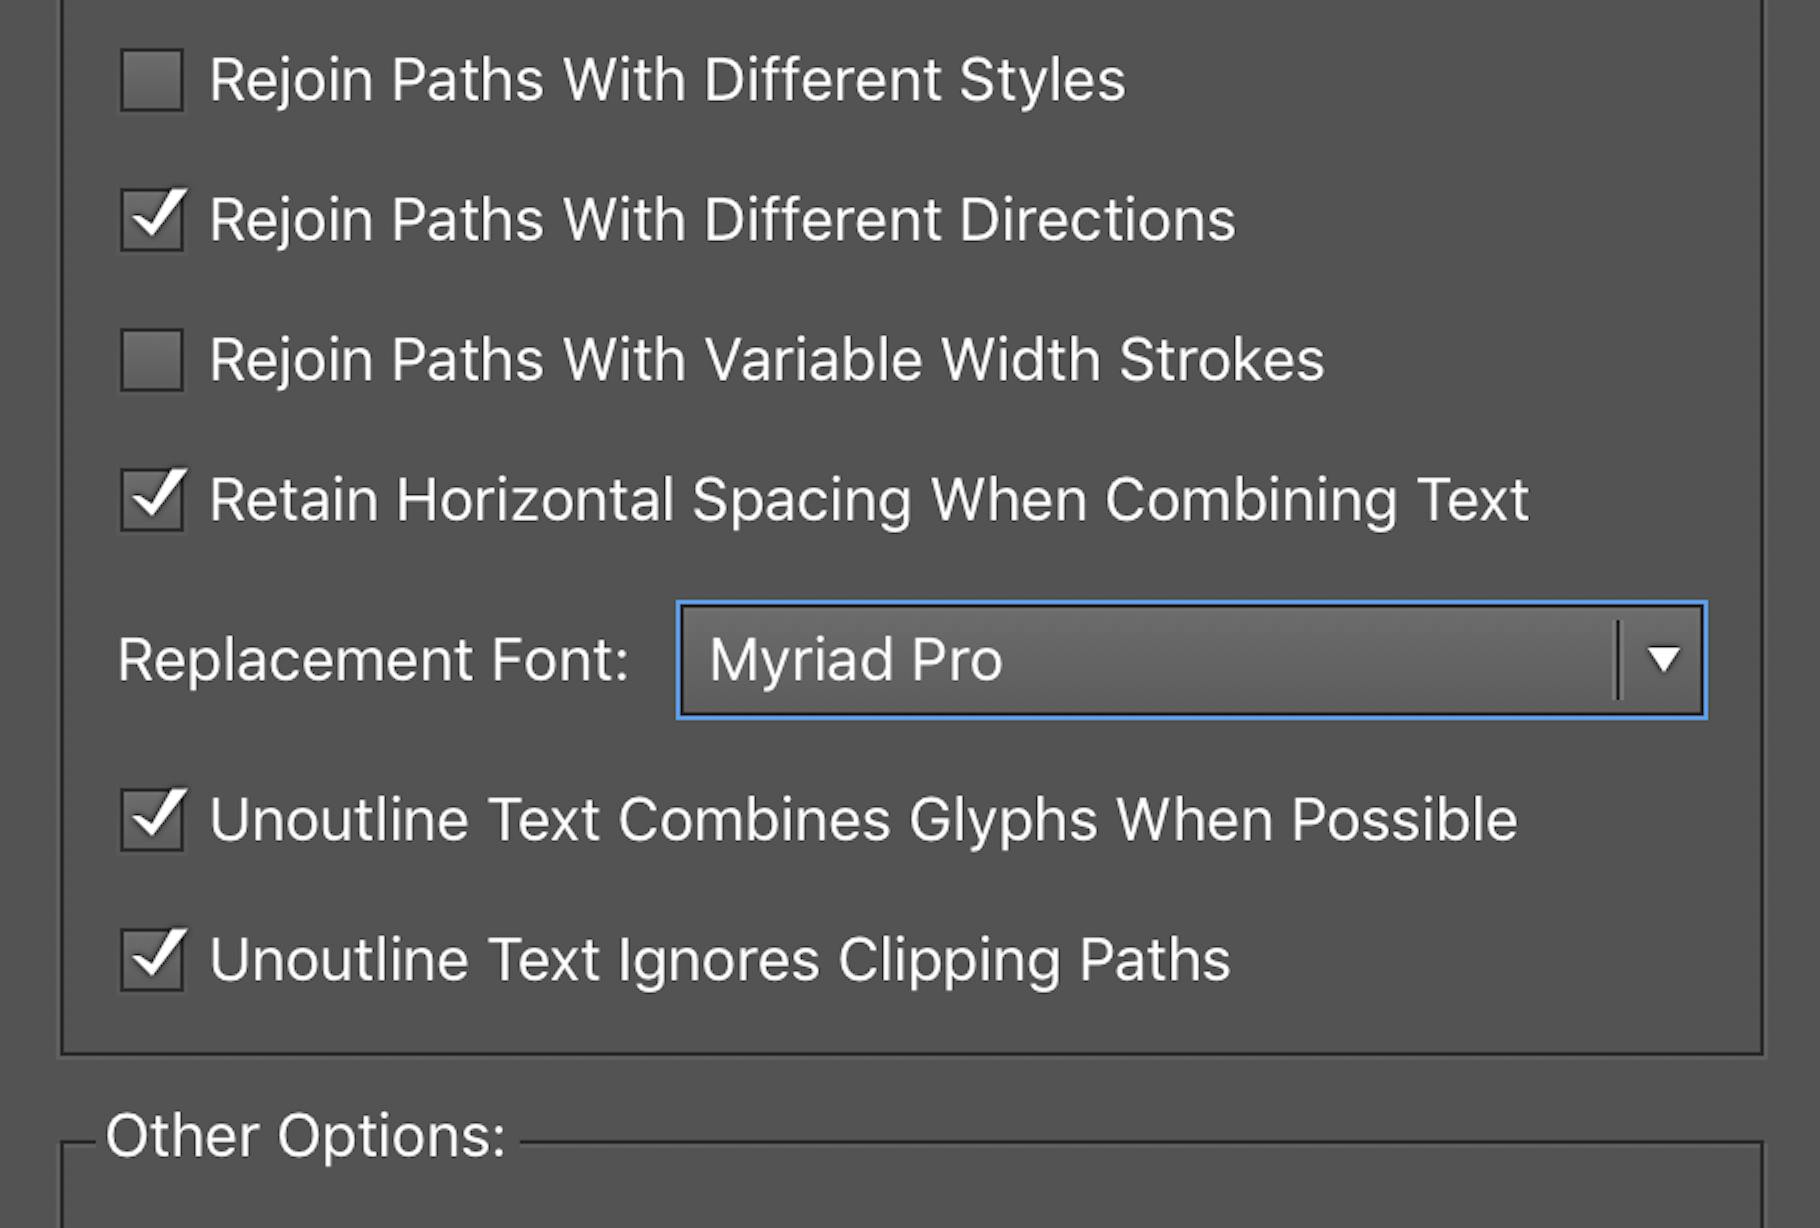 why wont my font download in illustrator